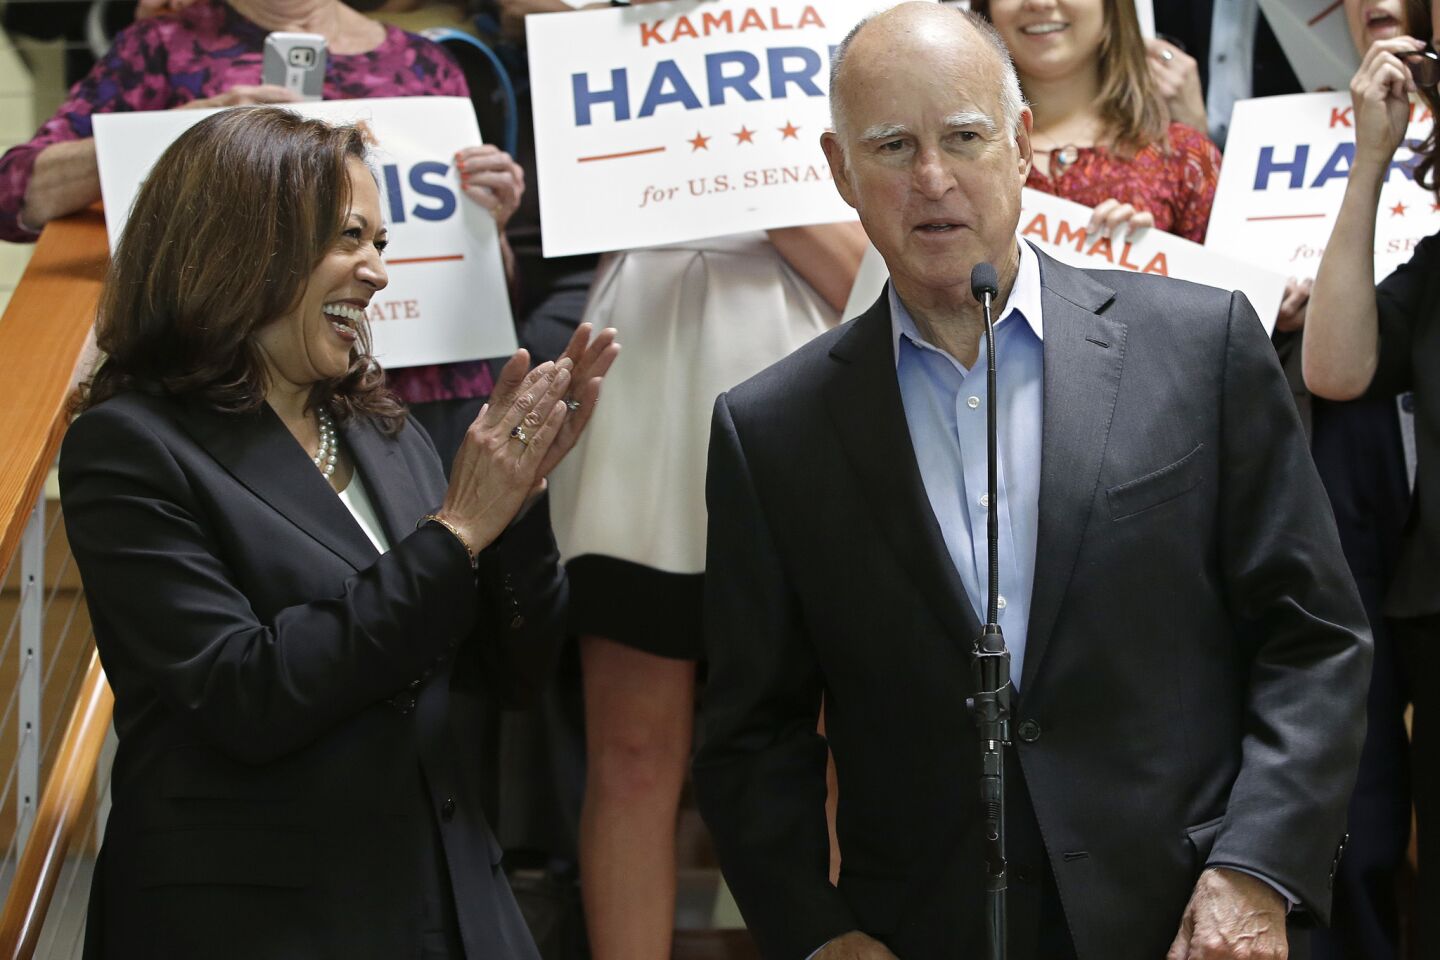 State Atty. Gen. Kamala Harris smiles and claps as Gov. Jerry Brown endorses her for the U.S. Senate.